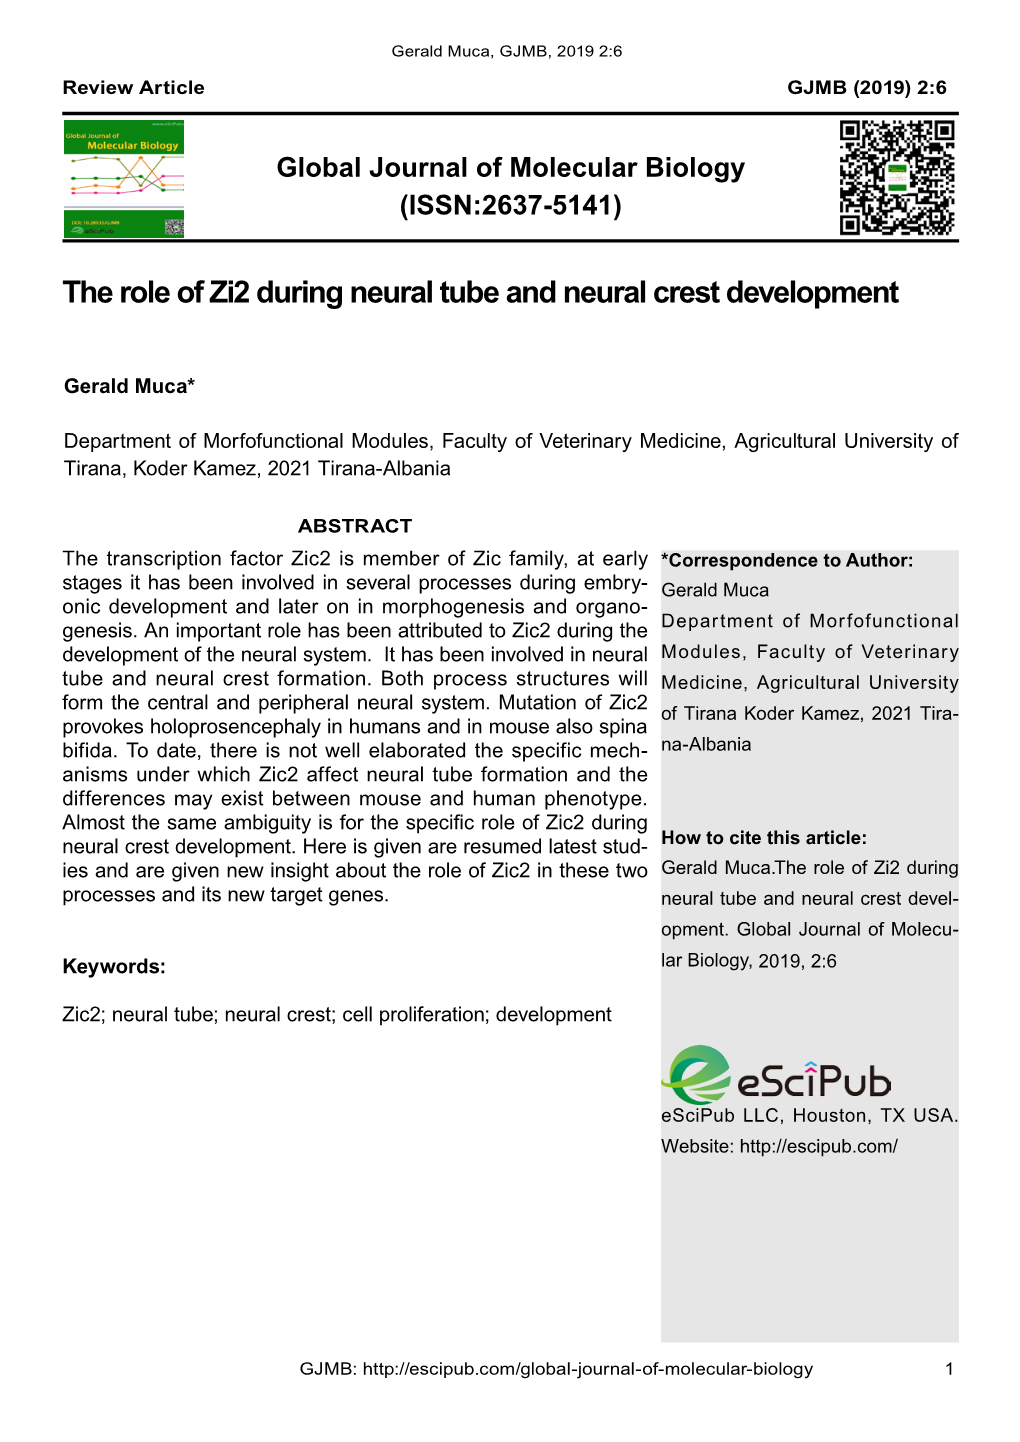 The Role of Zi2 During Neural Tube and Neural Crest Development